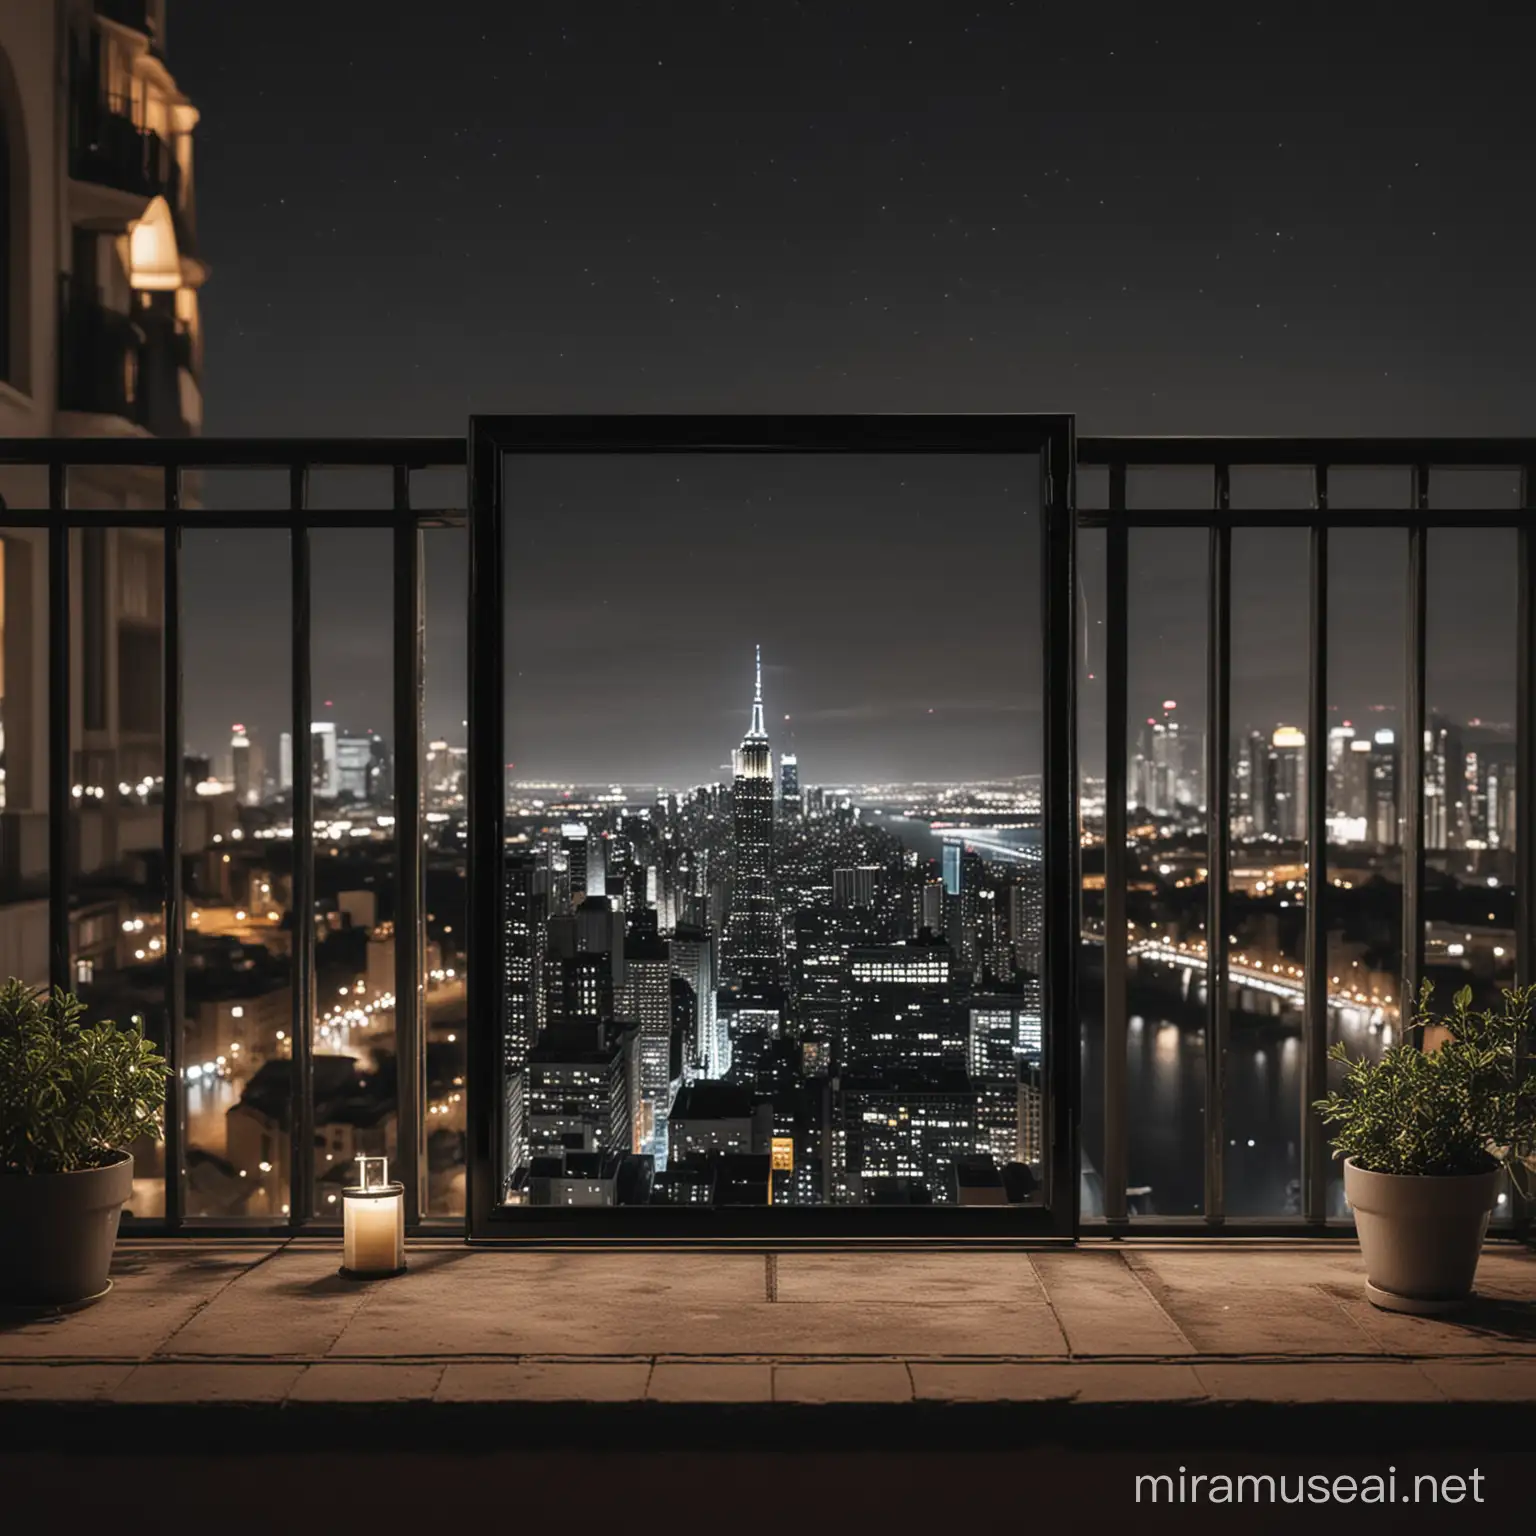 Night Cityscape Balcony View with A4 Black Frame Mockup